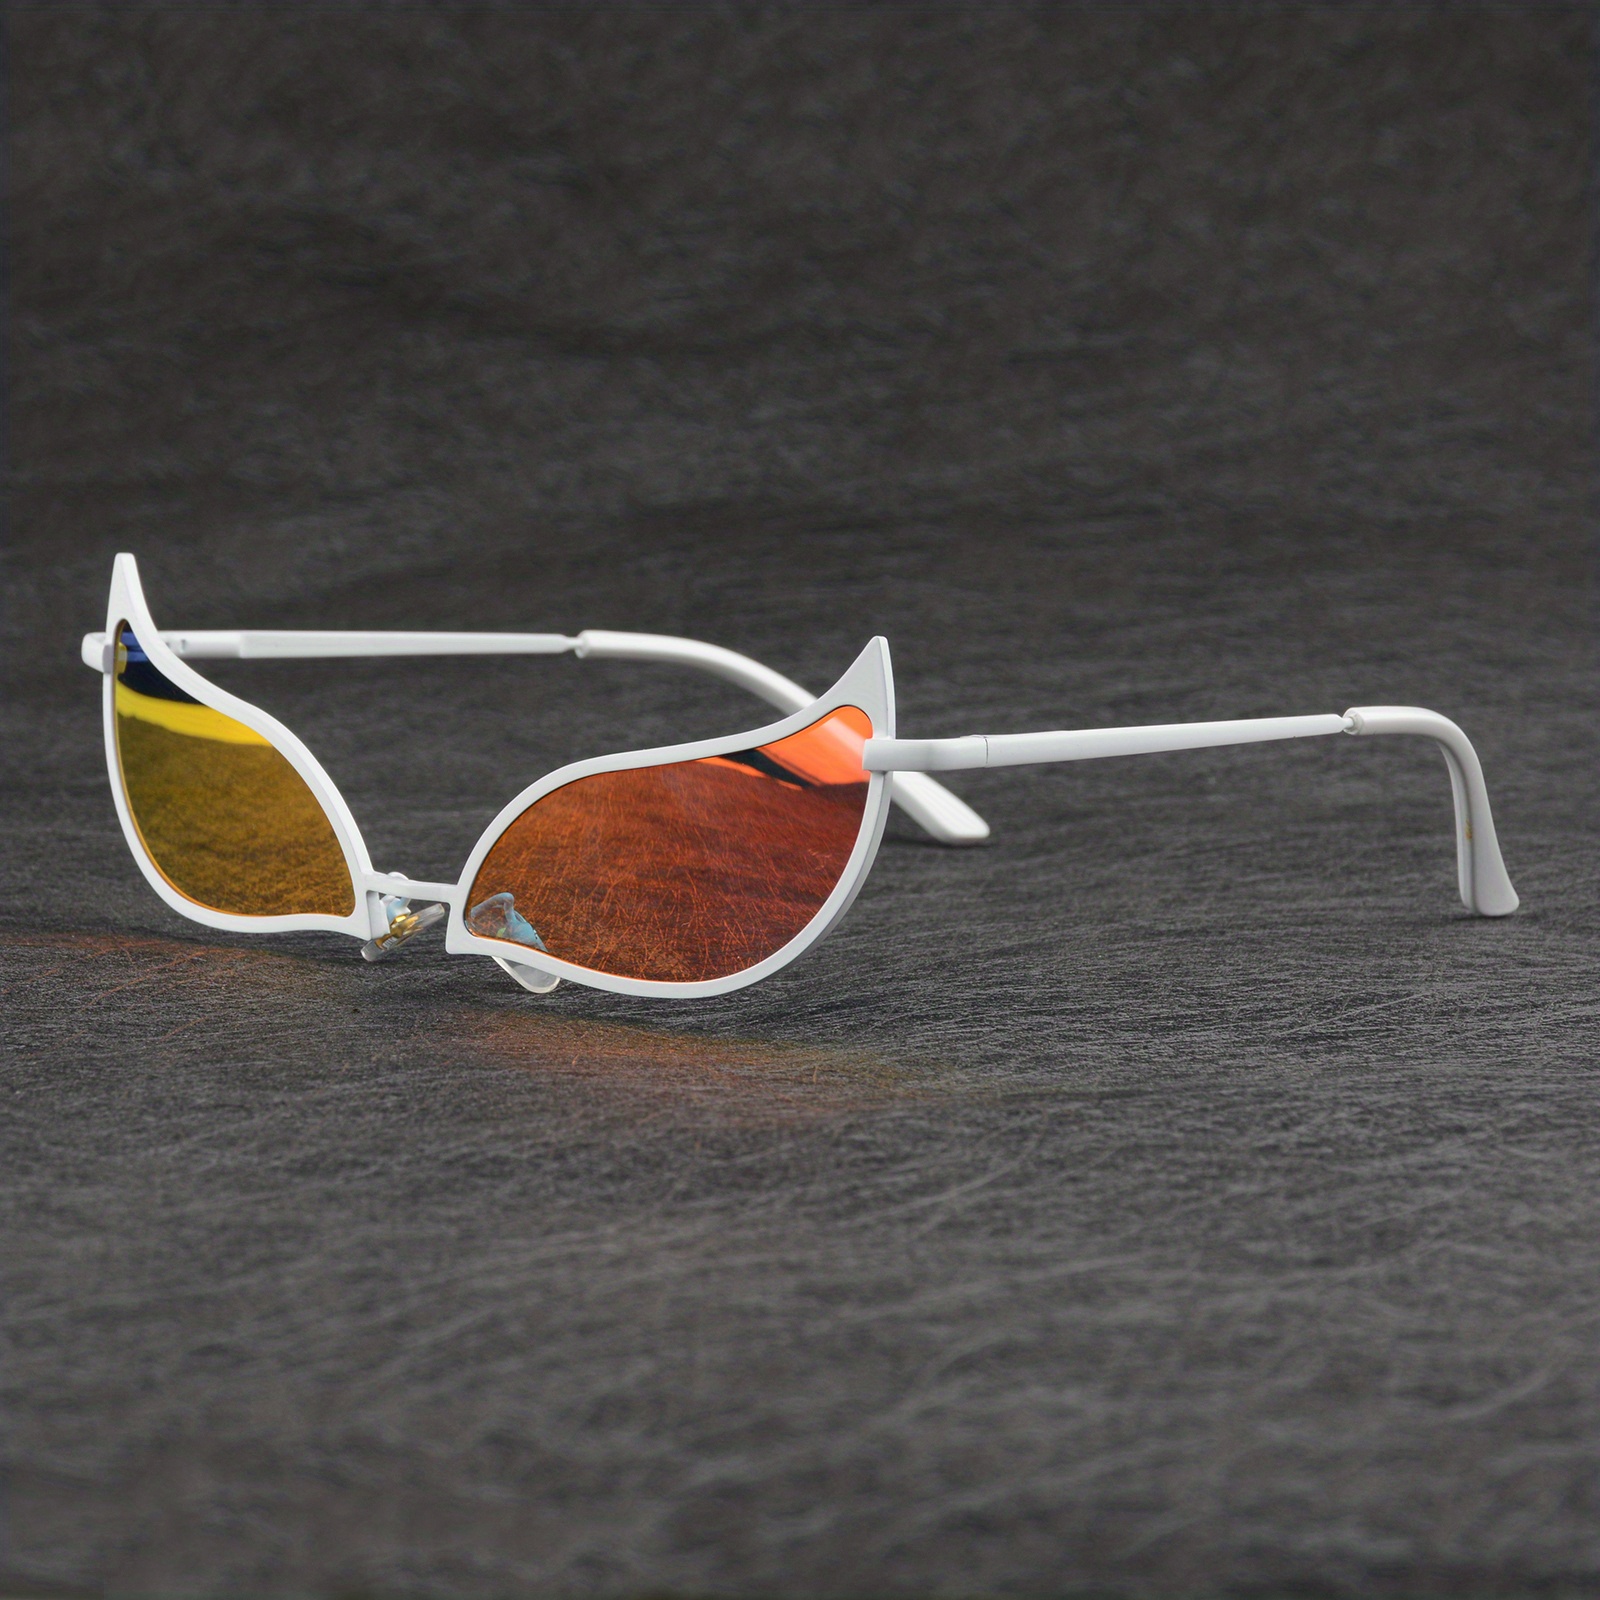 Doflamingo Glasses - Cool Sleek Doflamingo-inspired Sunglasses That Create  A Smooth And Sophisticated Look Great For Everyday Wear And Perfect For